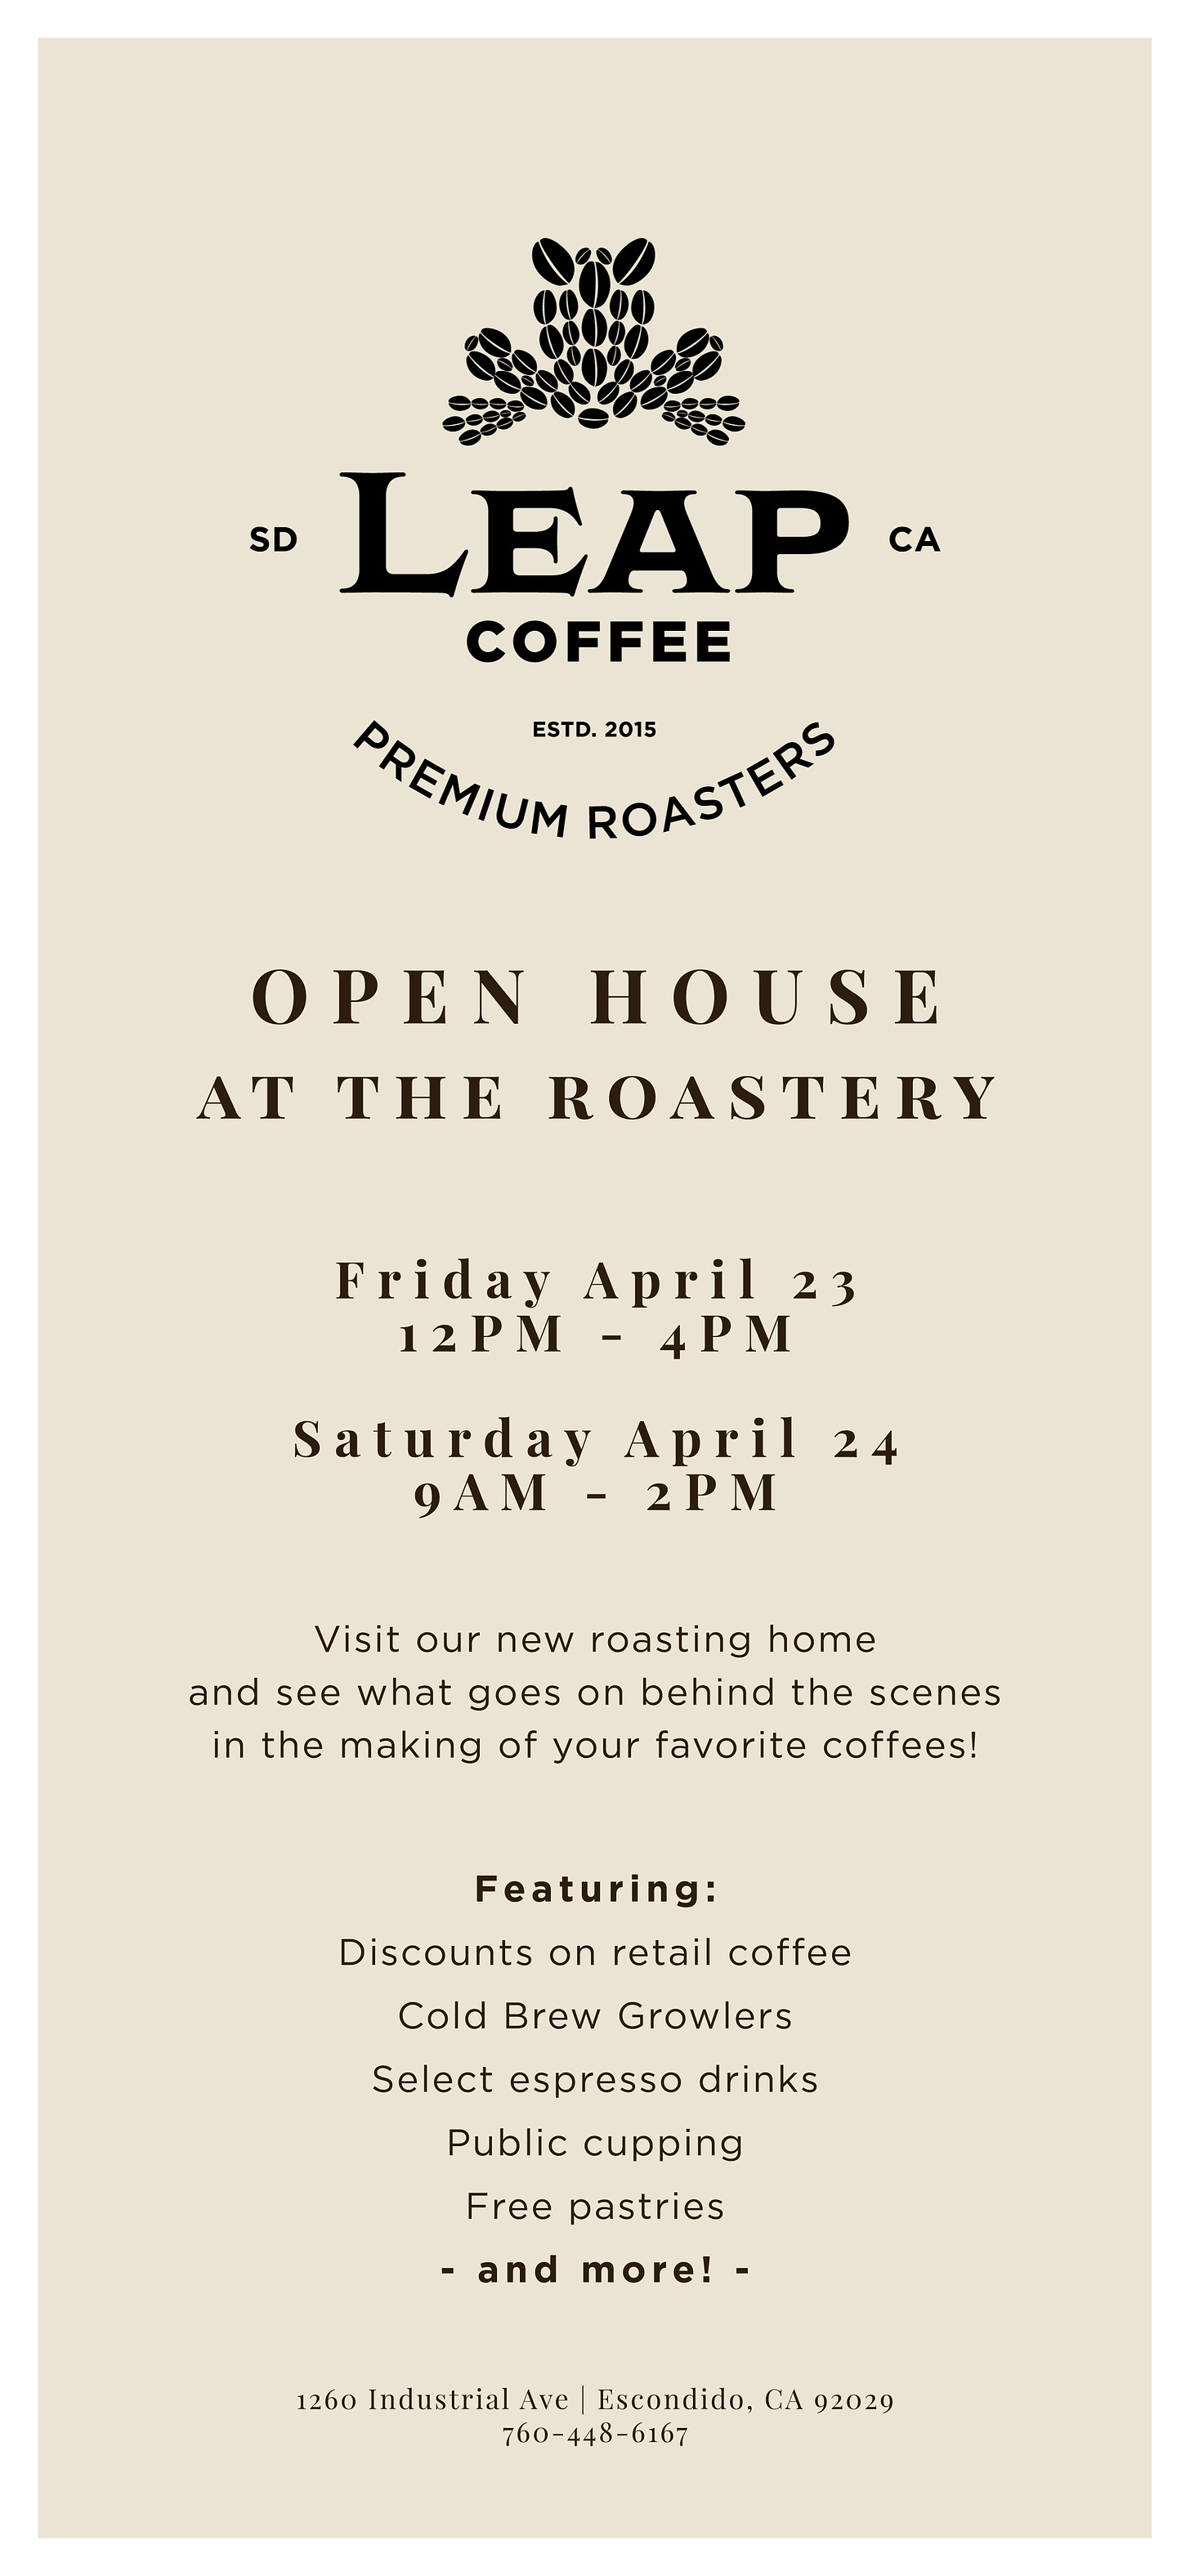 A Leap Coffee flier advertising their open house on 4/24 and 4/23/2021. Black type on beige background. Serif font and vertical layout.